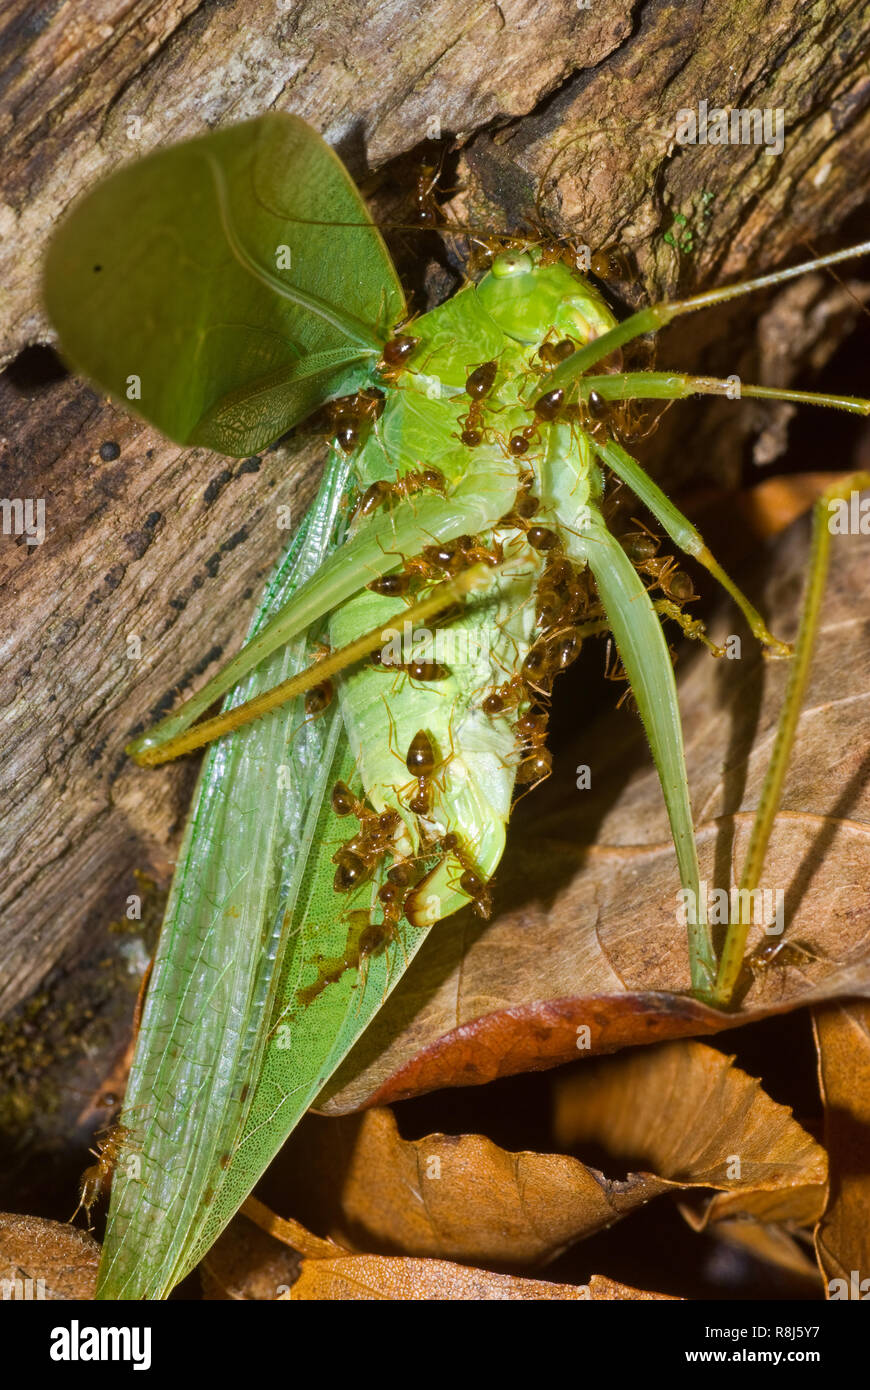 Small ants working on dead katydid on forest floor, Virginia. The ants will eventually dismember insect and carry the parts back to their nest. Stock Photo